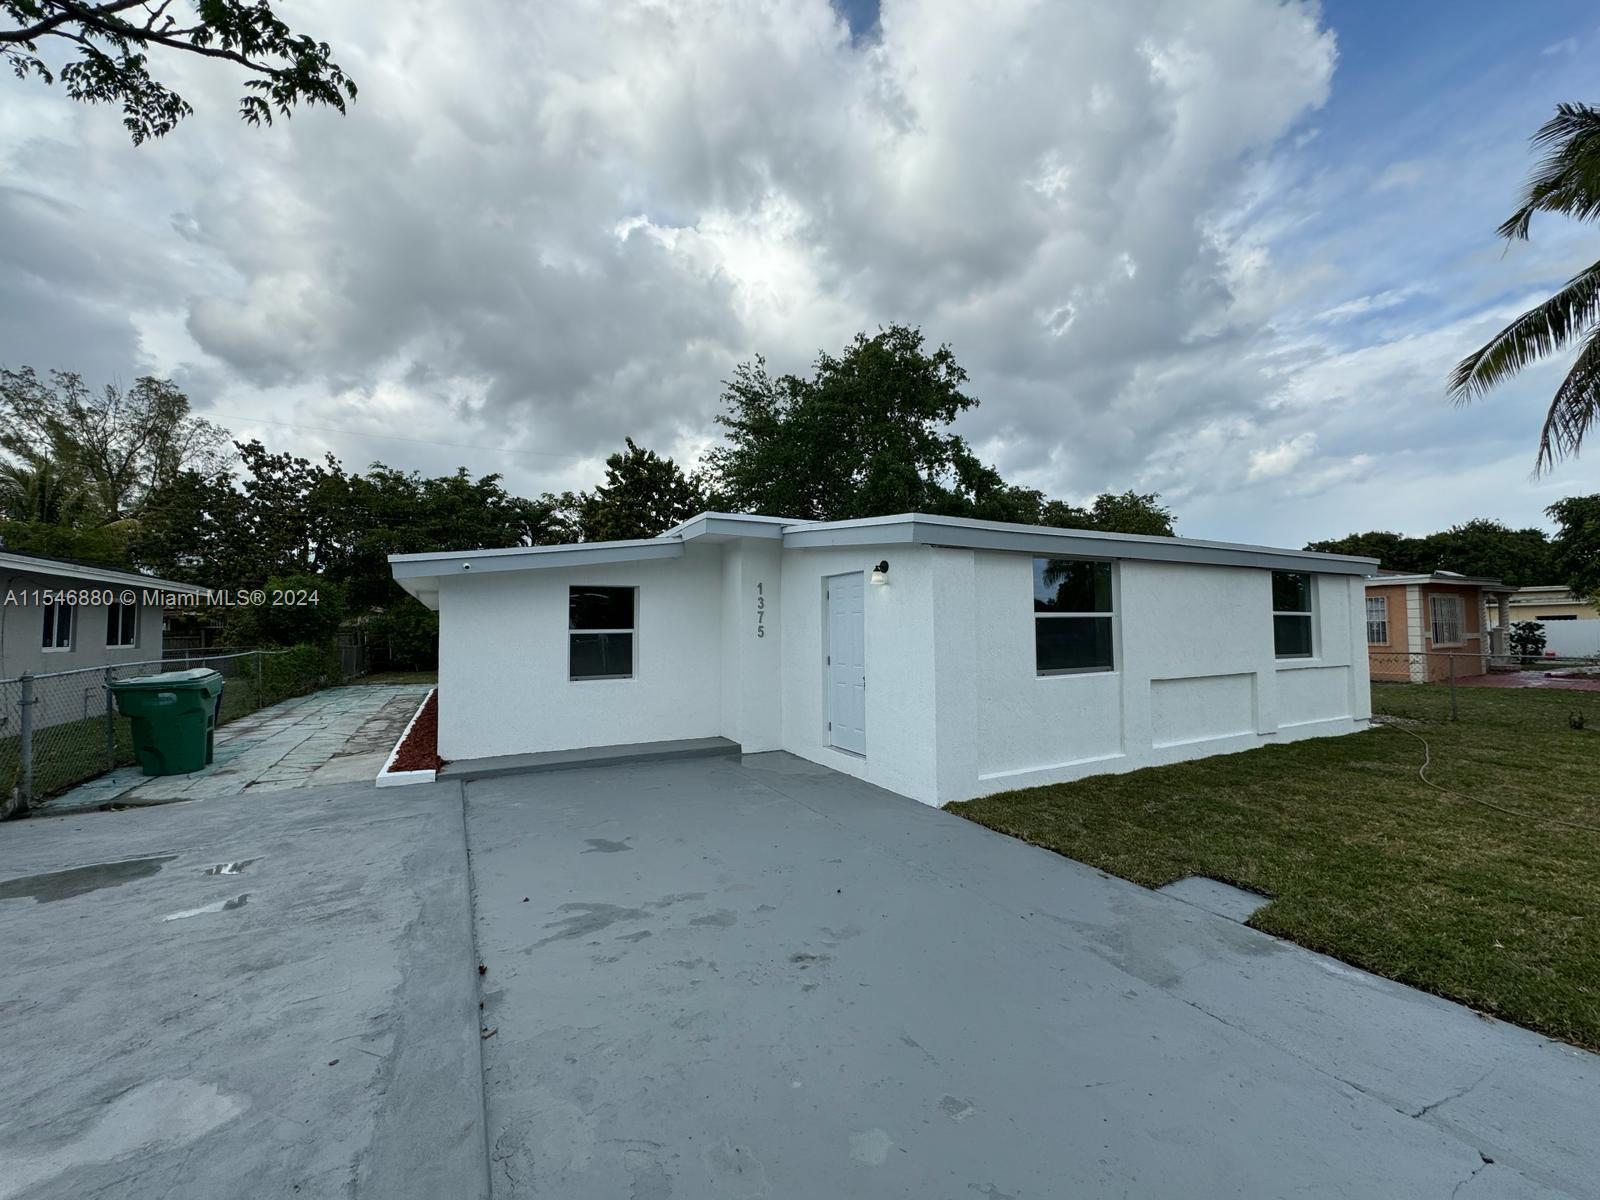 Photo of 1375 NW 116th St in Miami, FL